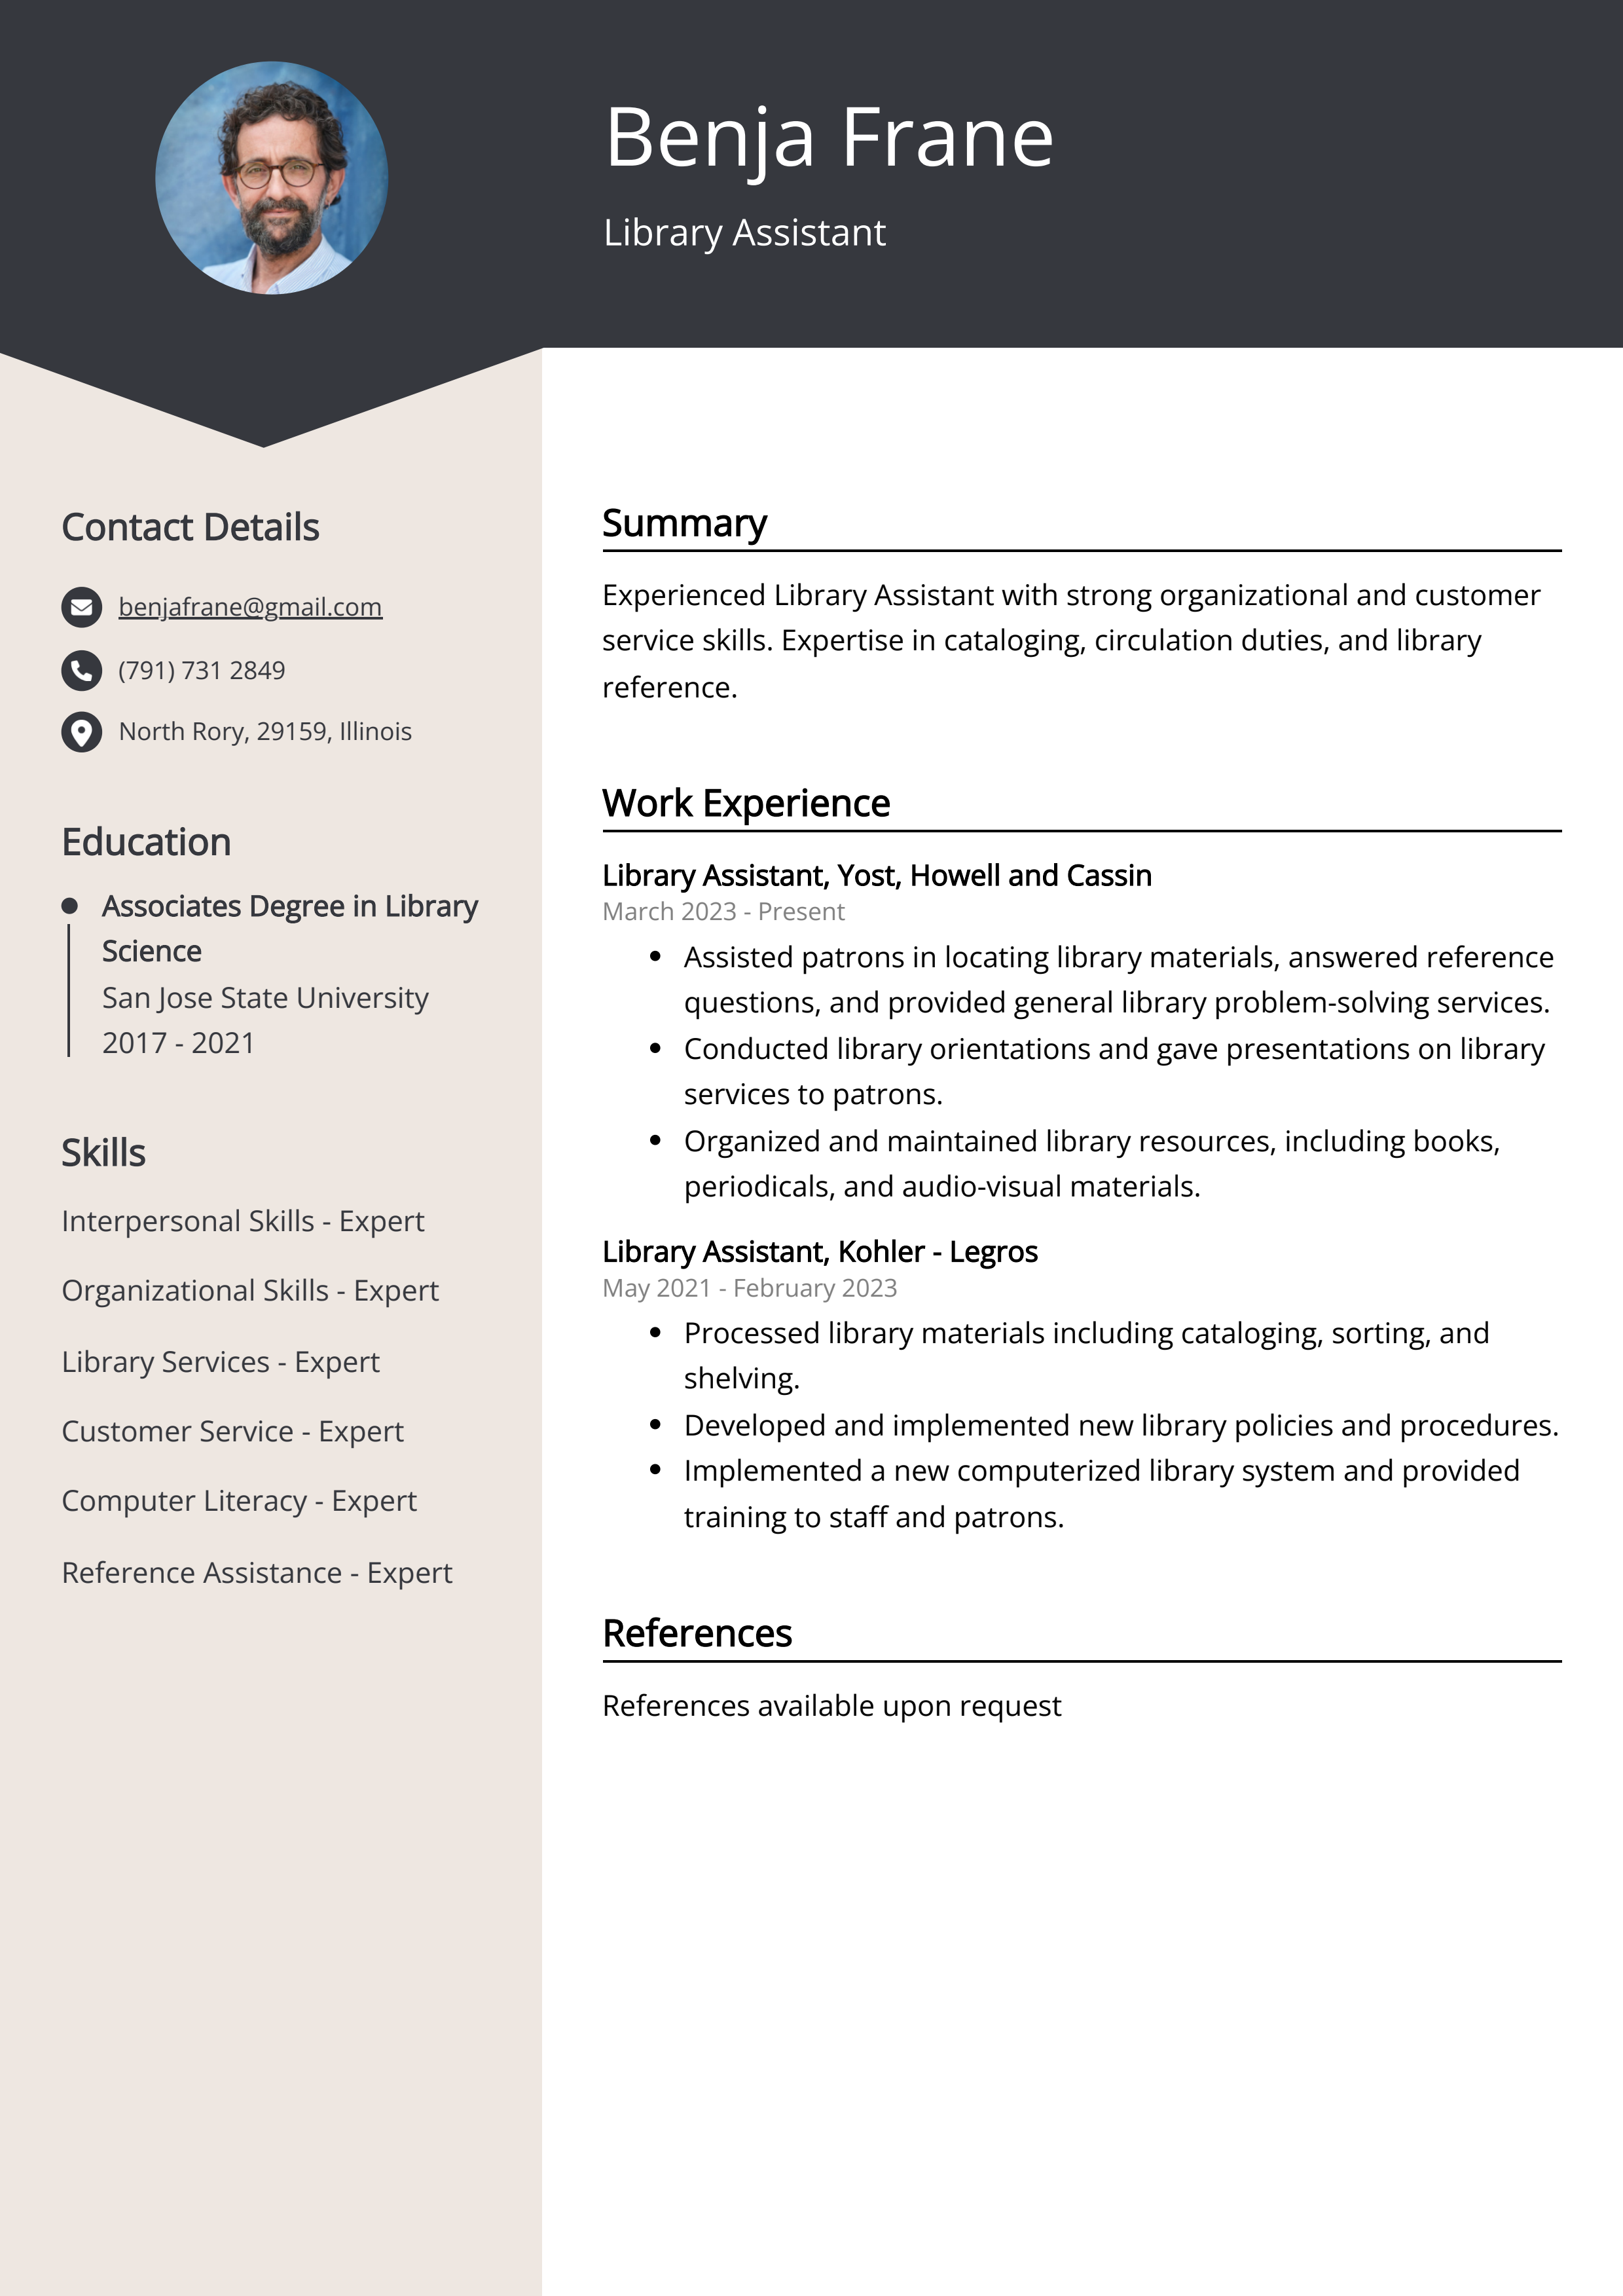 Library Assistant CV Example